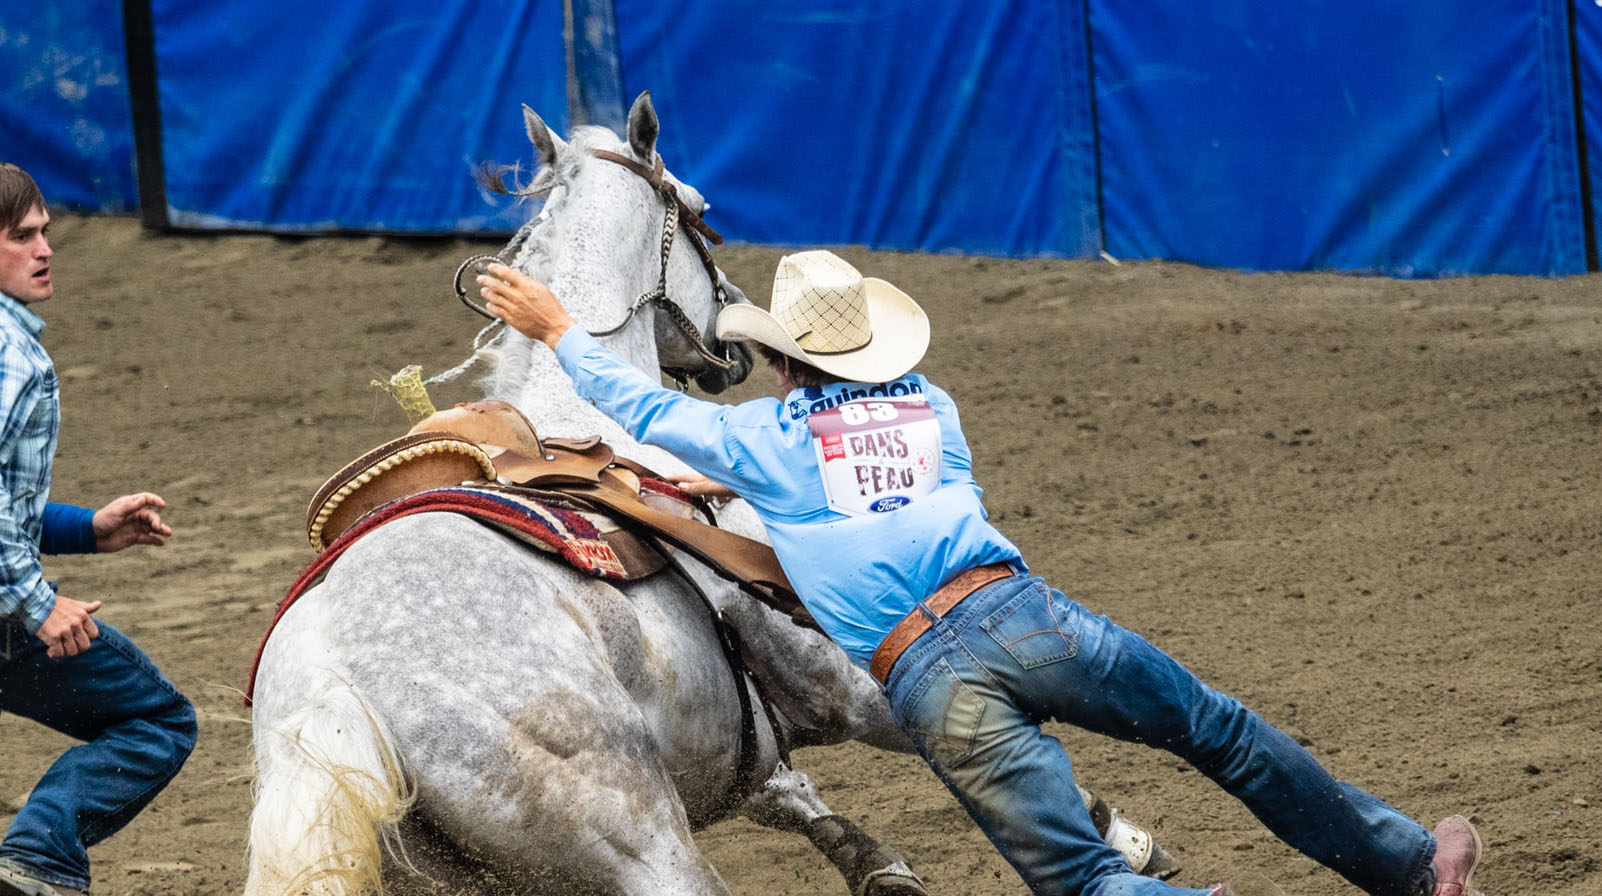 National Junior High Finals Rodeo Schedule & Tickets for 2023 Dates